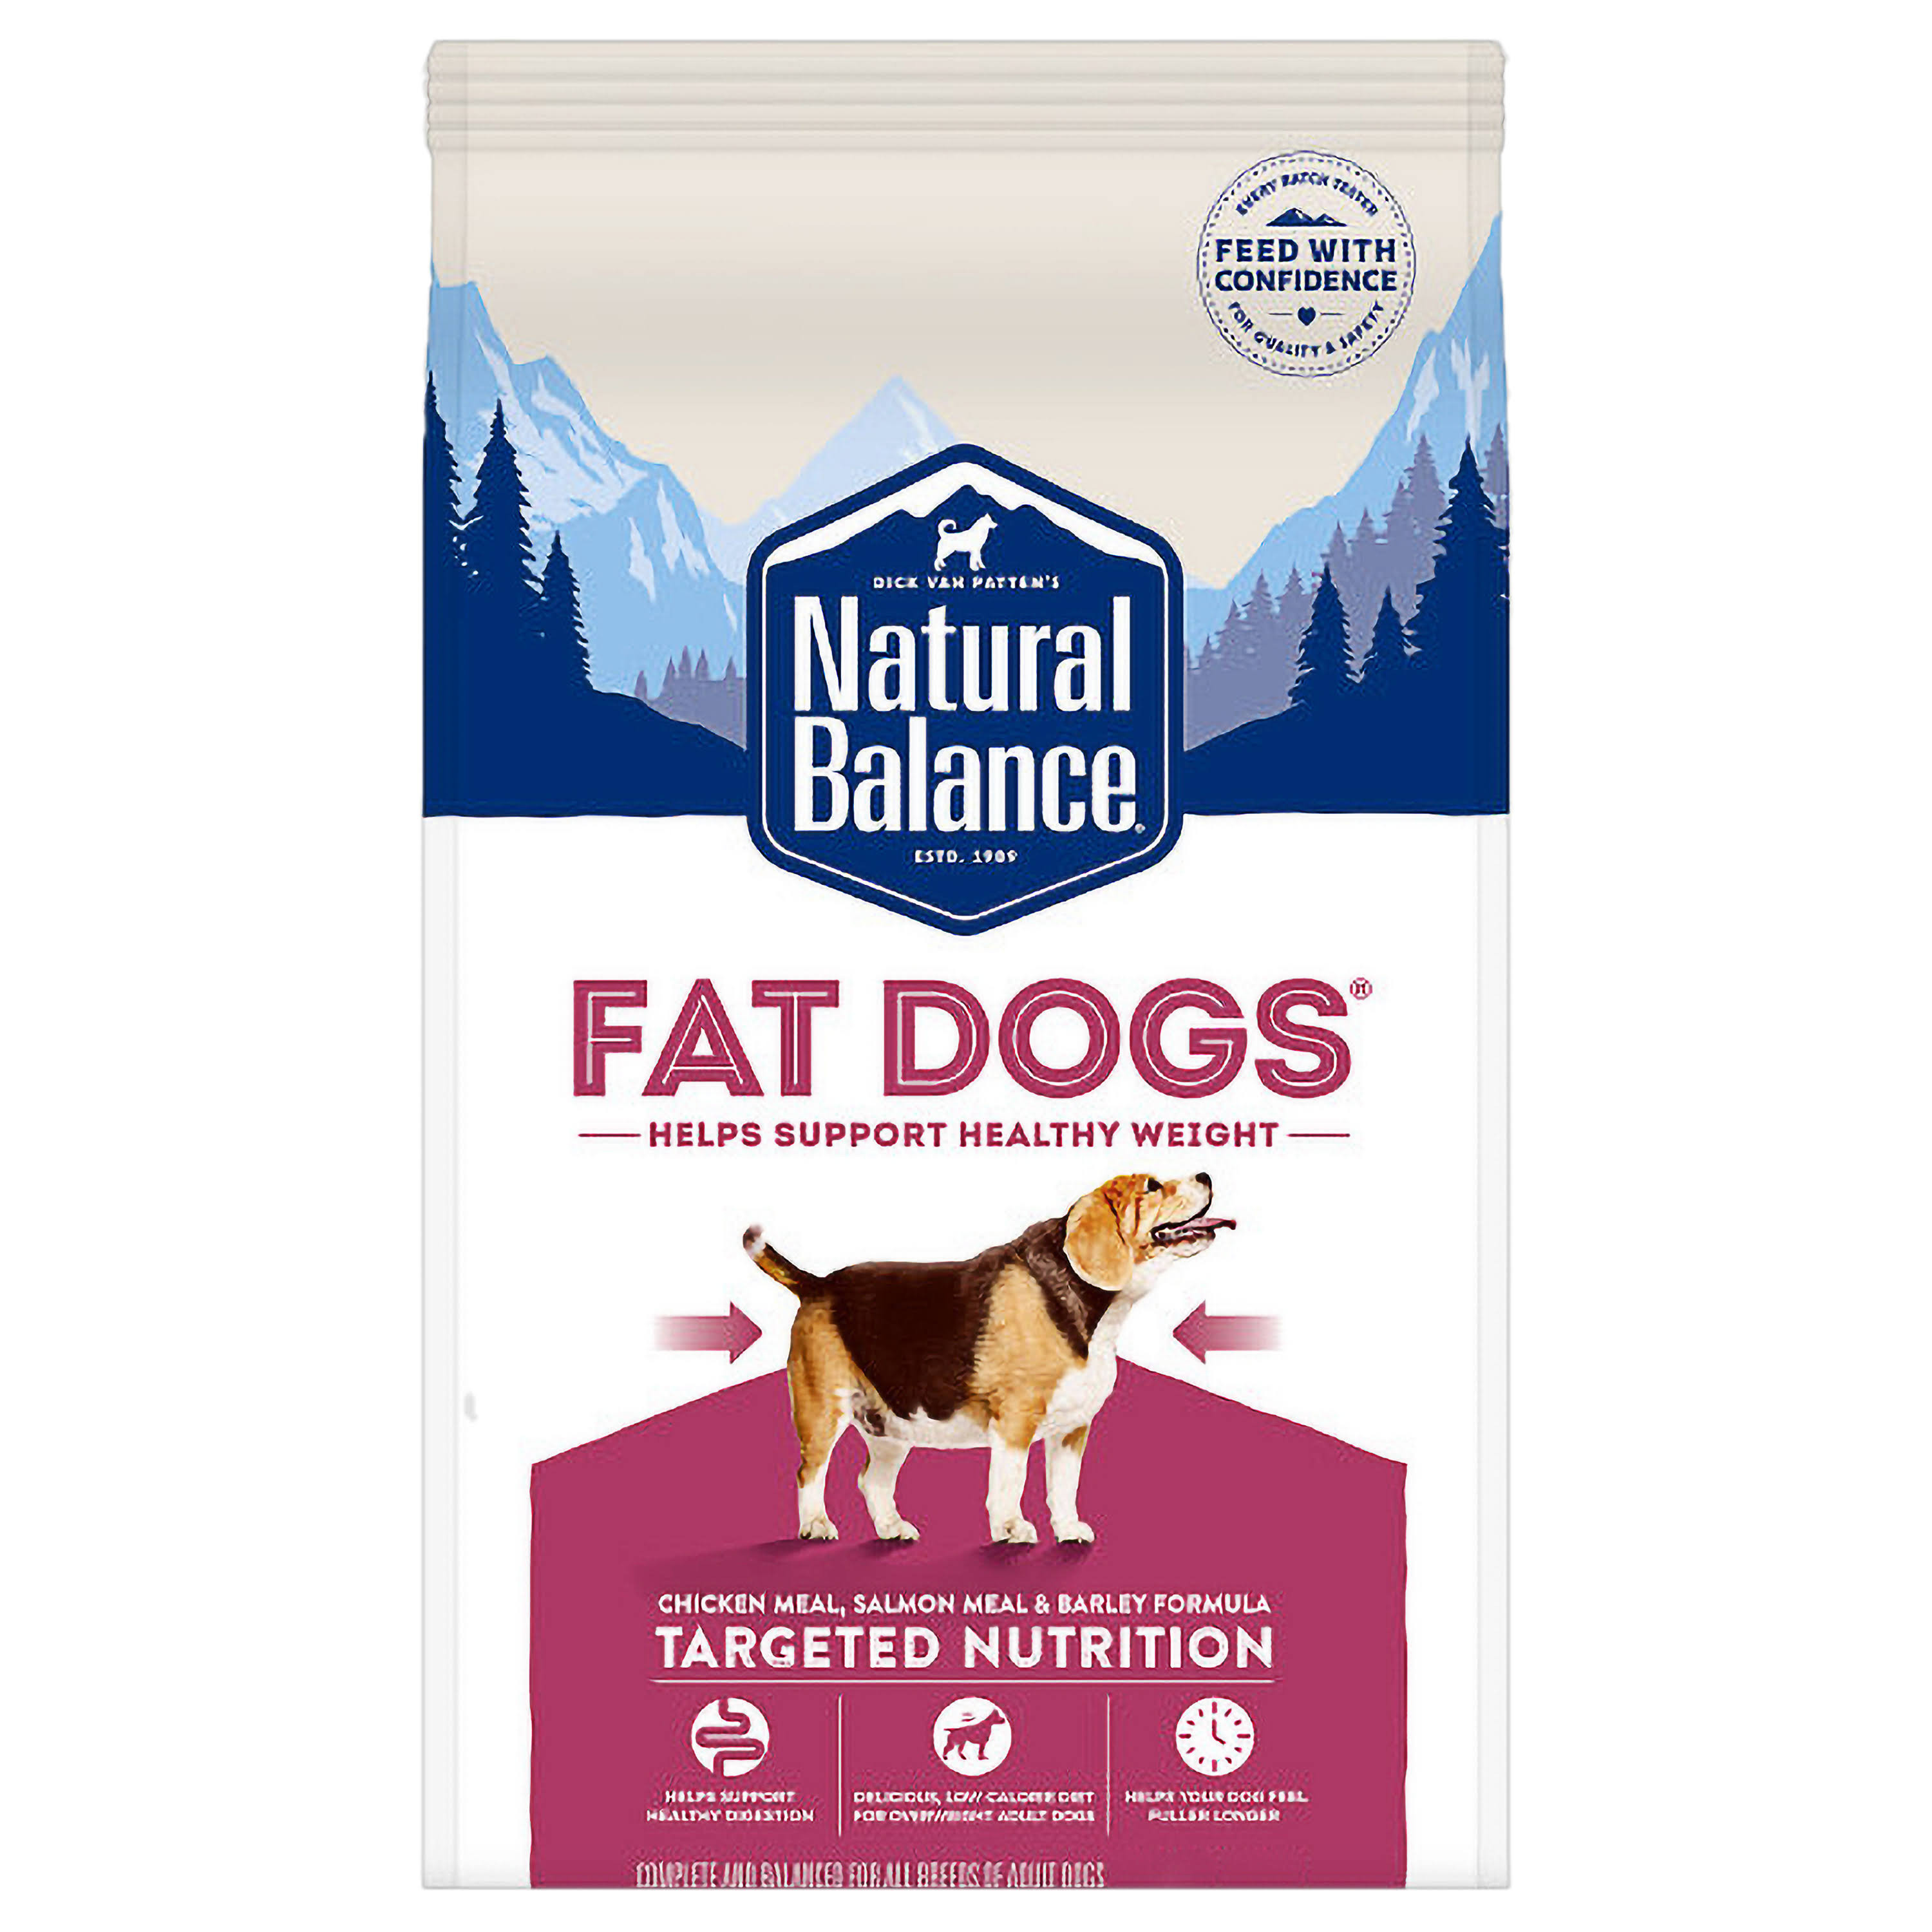 Natural Balance Fat Dogs Chicken and Salmon Formula Dry Dog Food - 5lb